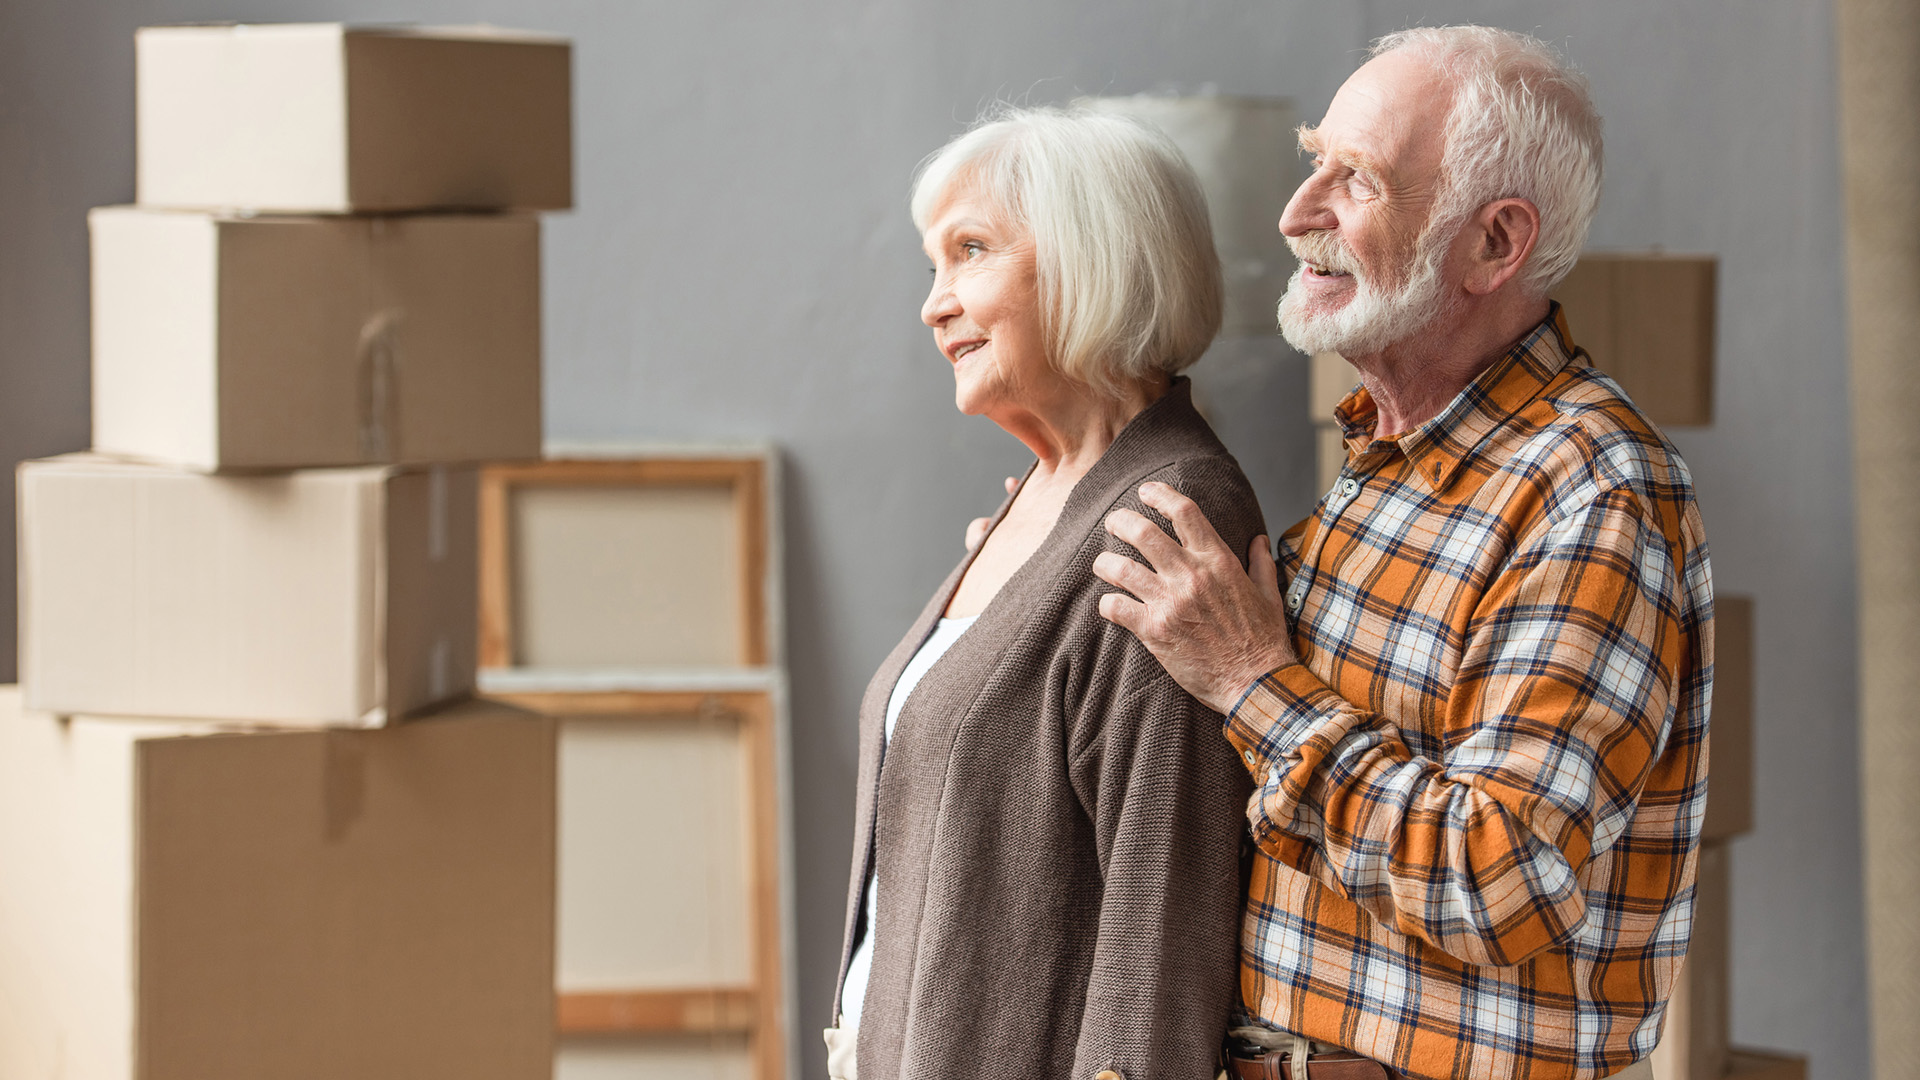 Featured image for “Tips for Downsizing Your Home for a Move to Senior Living”